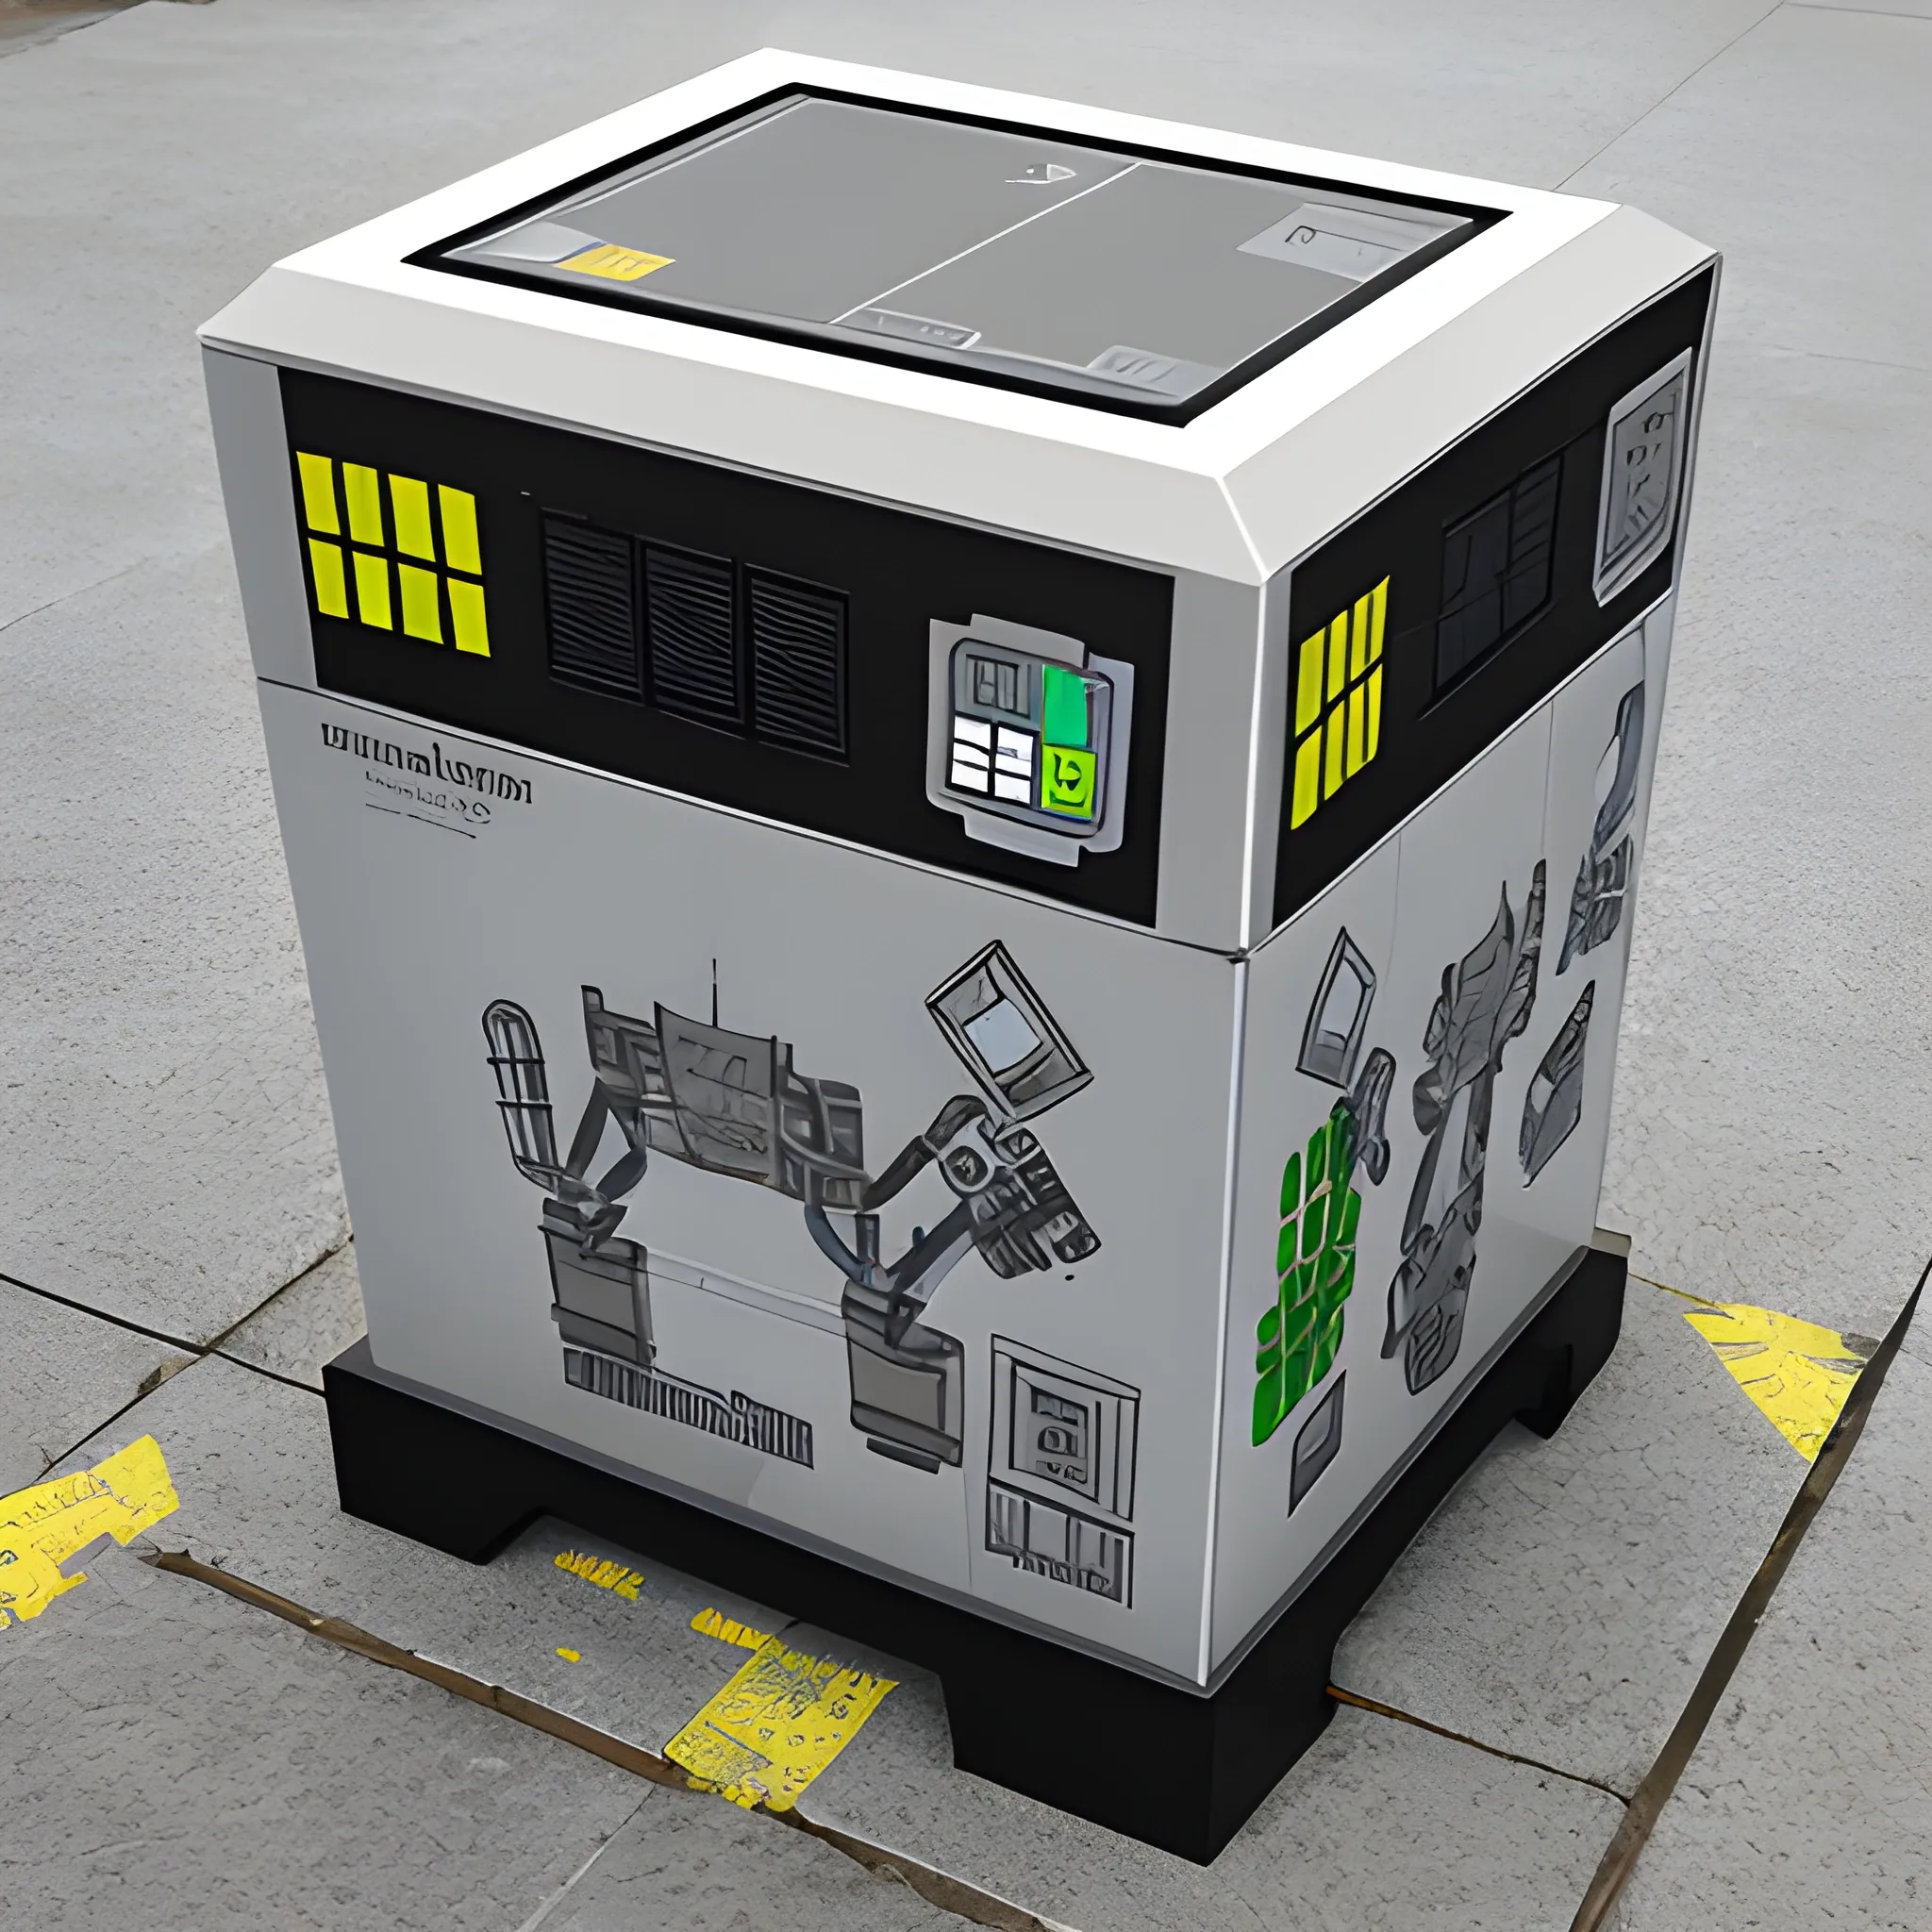  a robot recycle machine(square)

